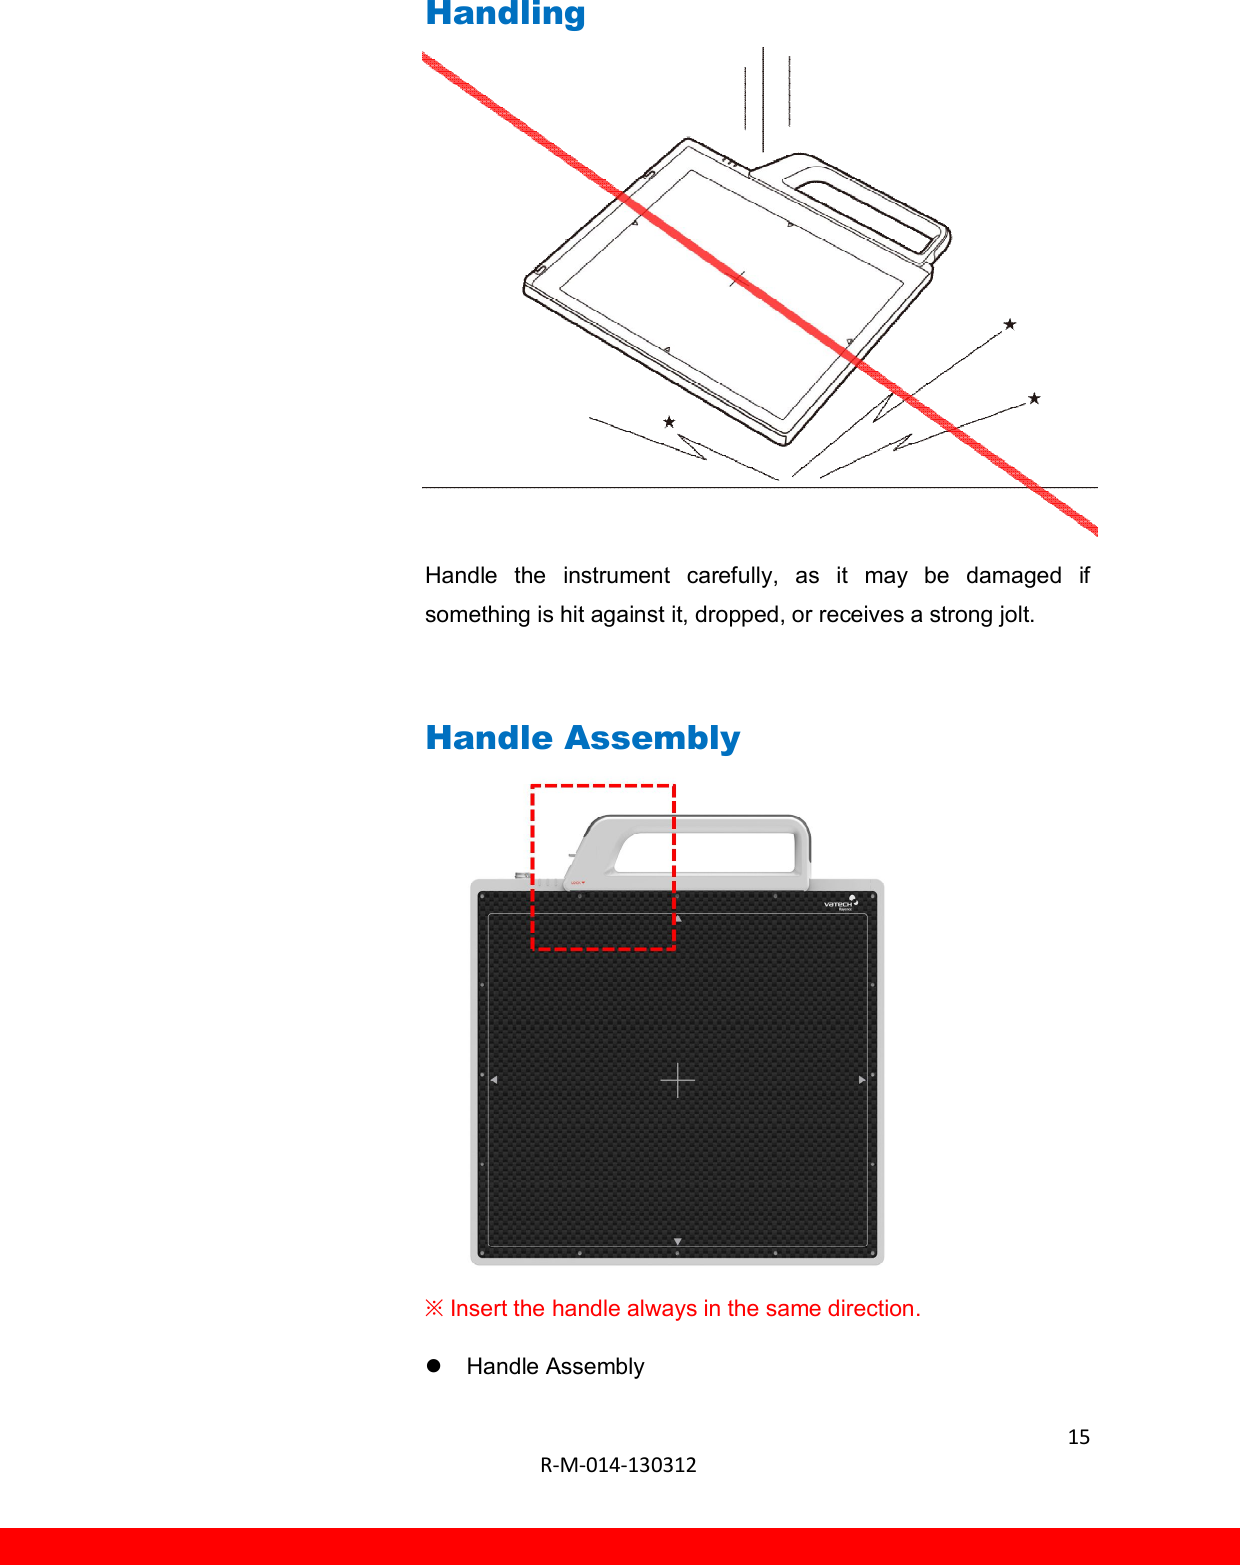  15  R-M-014-130312      Handling          Handle  the  instrument  carefully,  as  it  may  be  damaged  if something is hit against it, dropped, or receives a strong jolt.  Handle Assembly          ※ Insert the handle always in the same direction.   Handle Assembly 